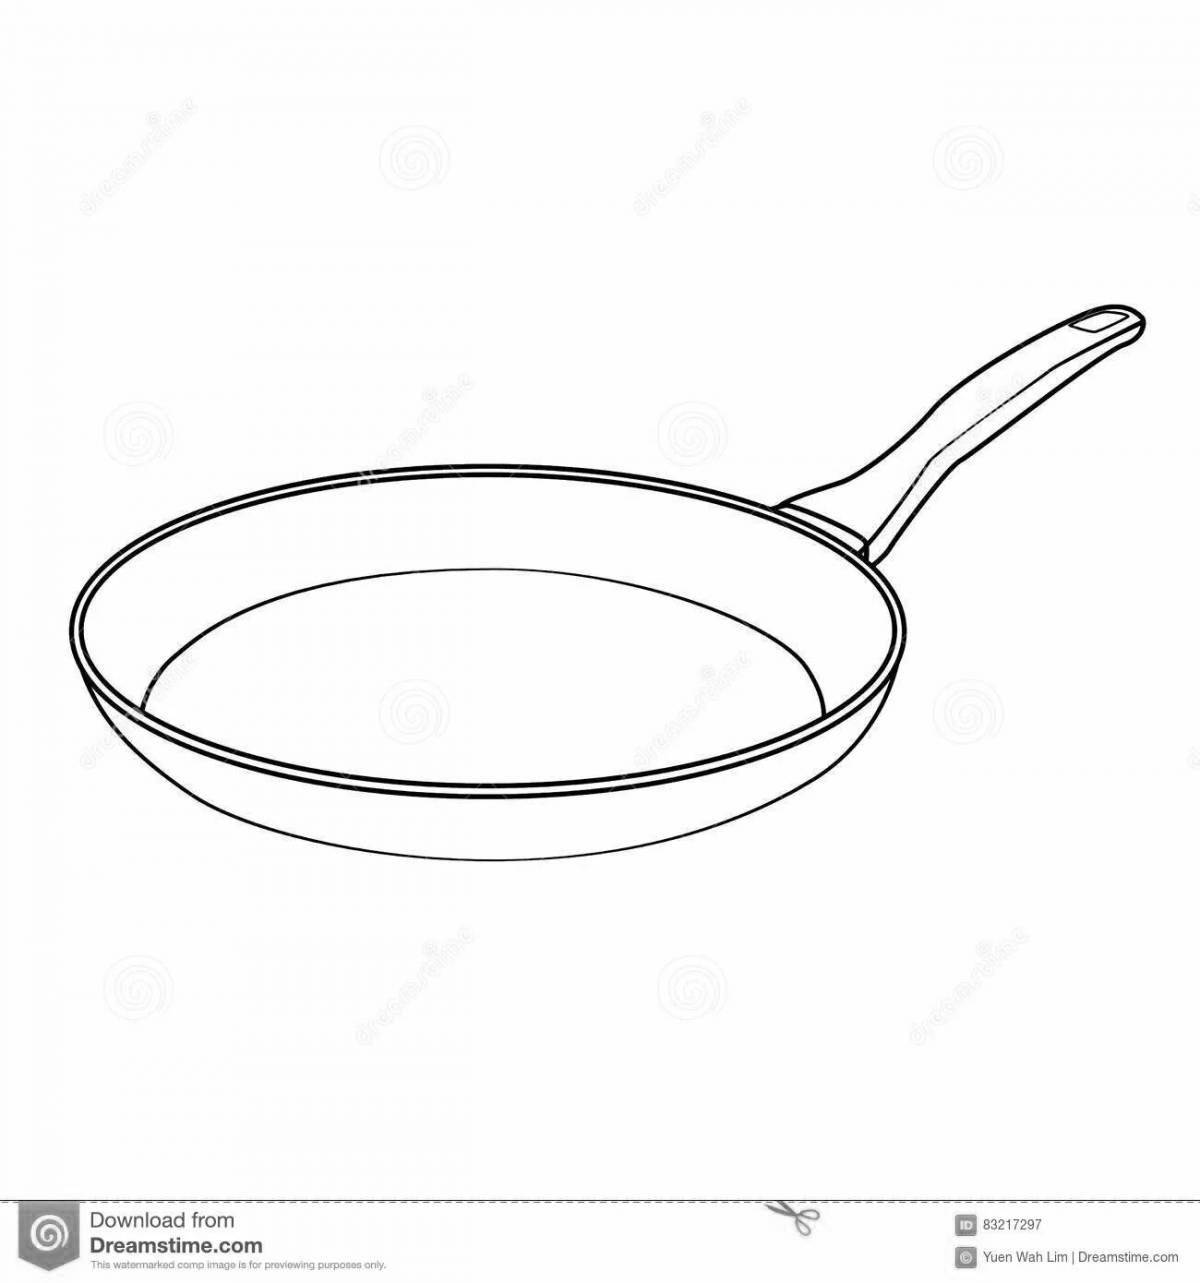 Playful frying pan coloring page for 3-4 year olds